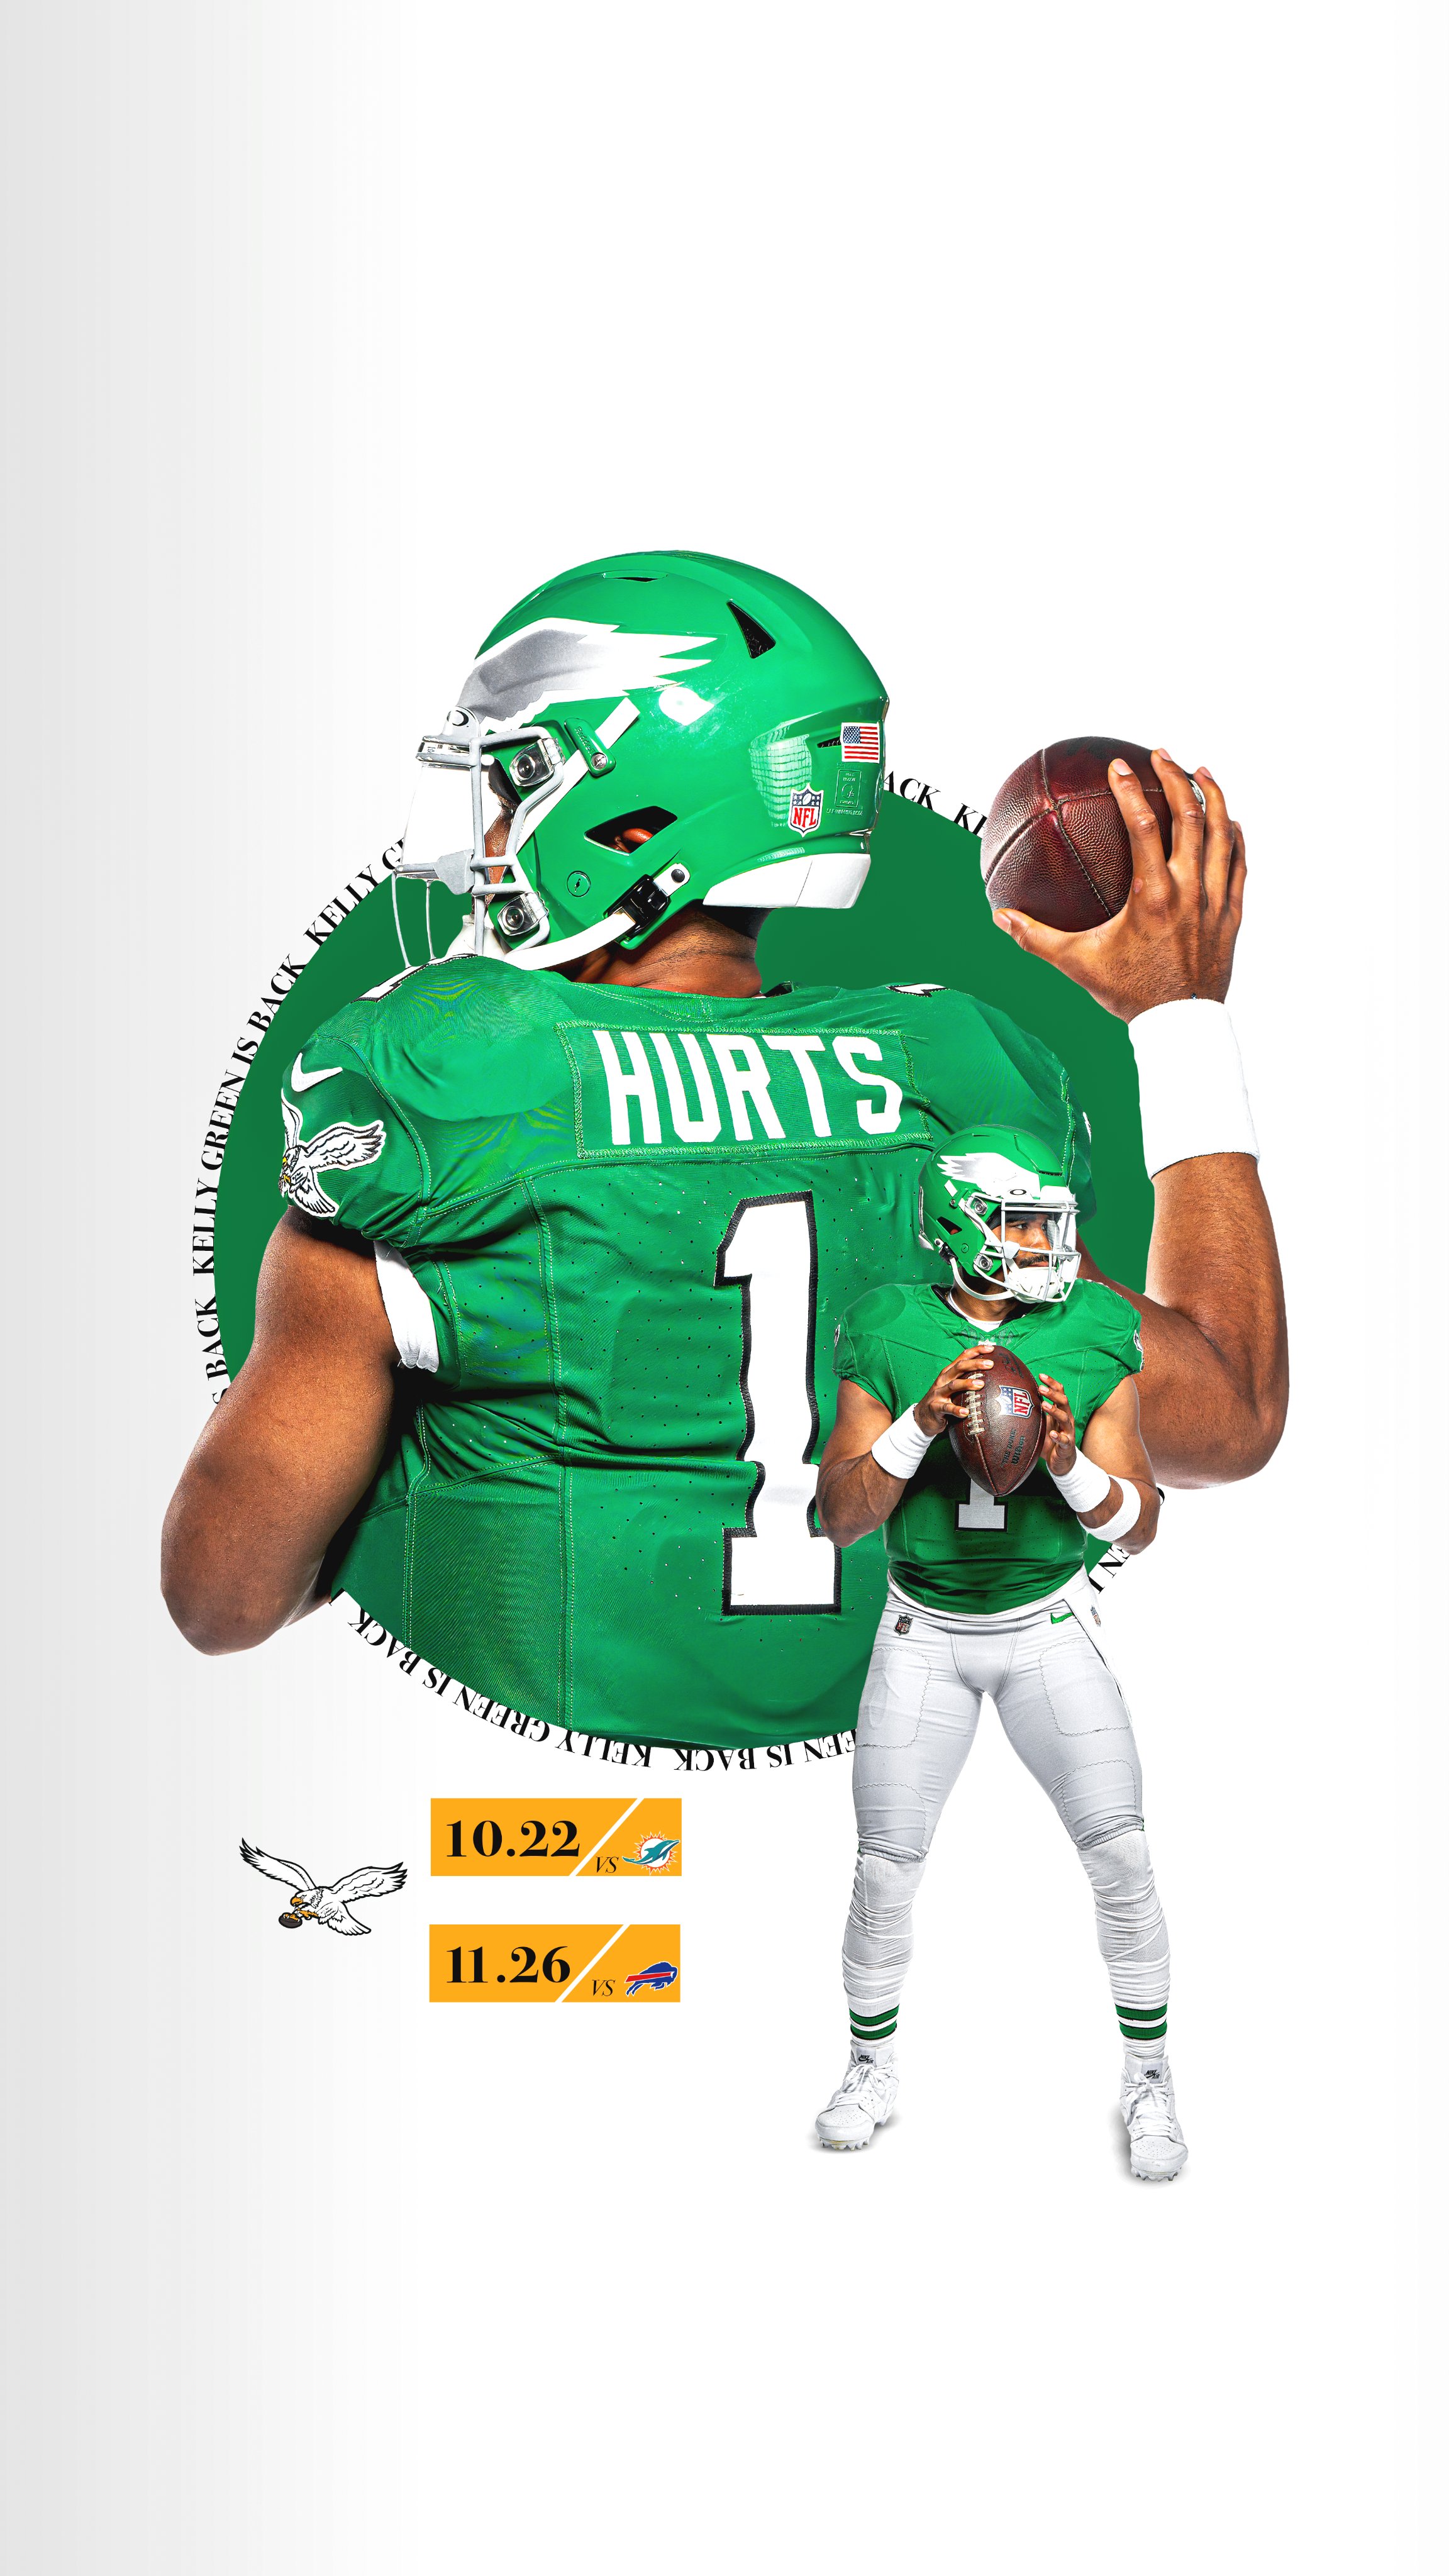 hurts kelly green jersey